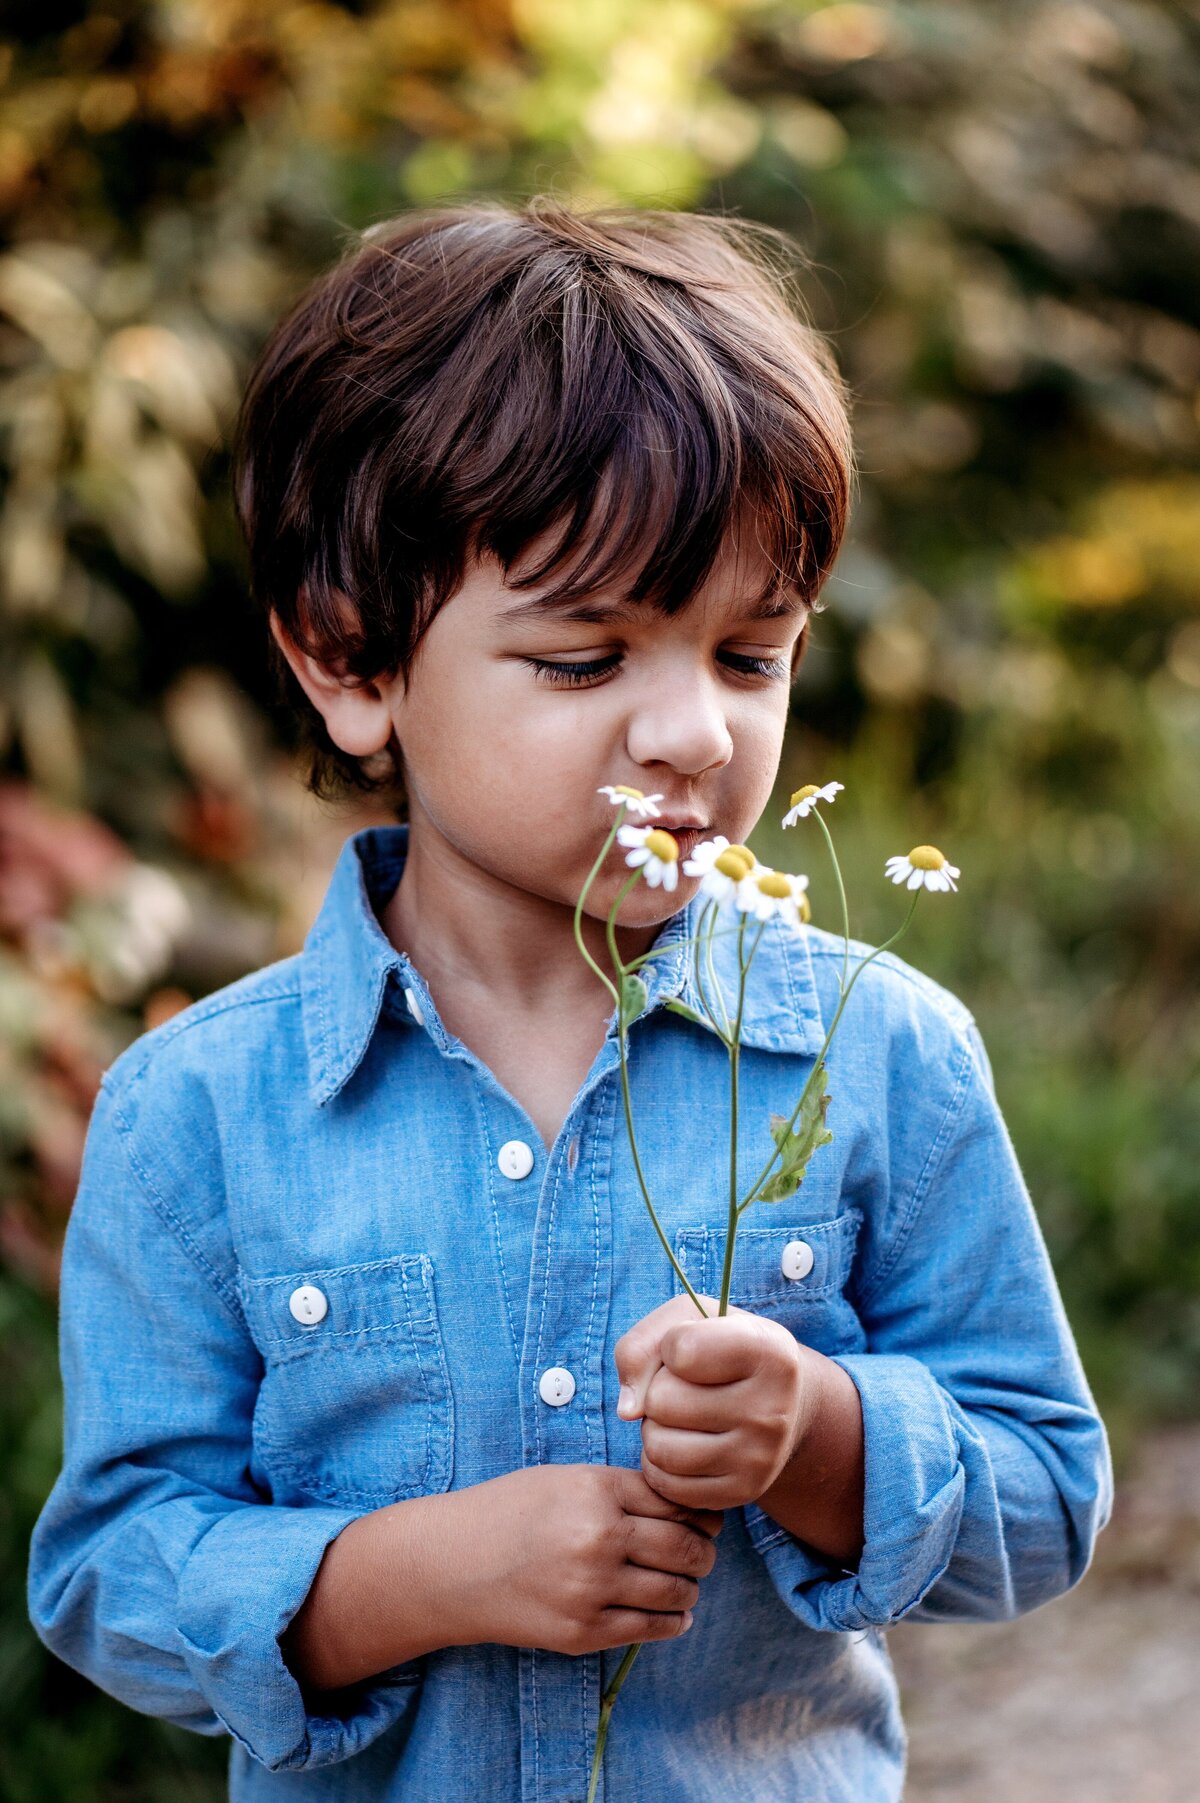 Child blowing flowers McKennaPattersonPhotography